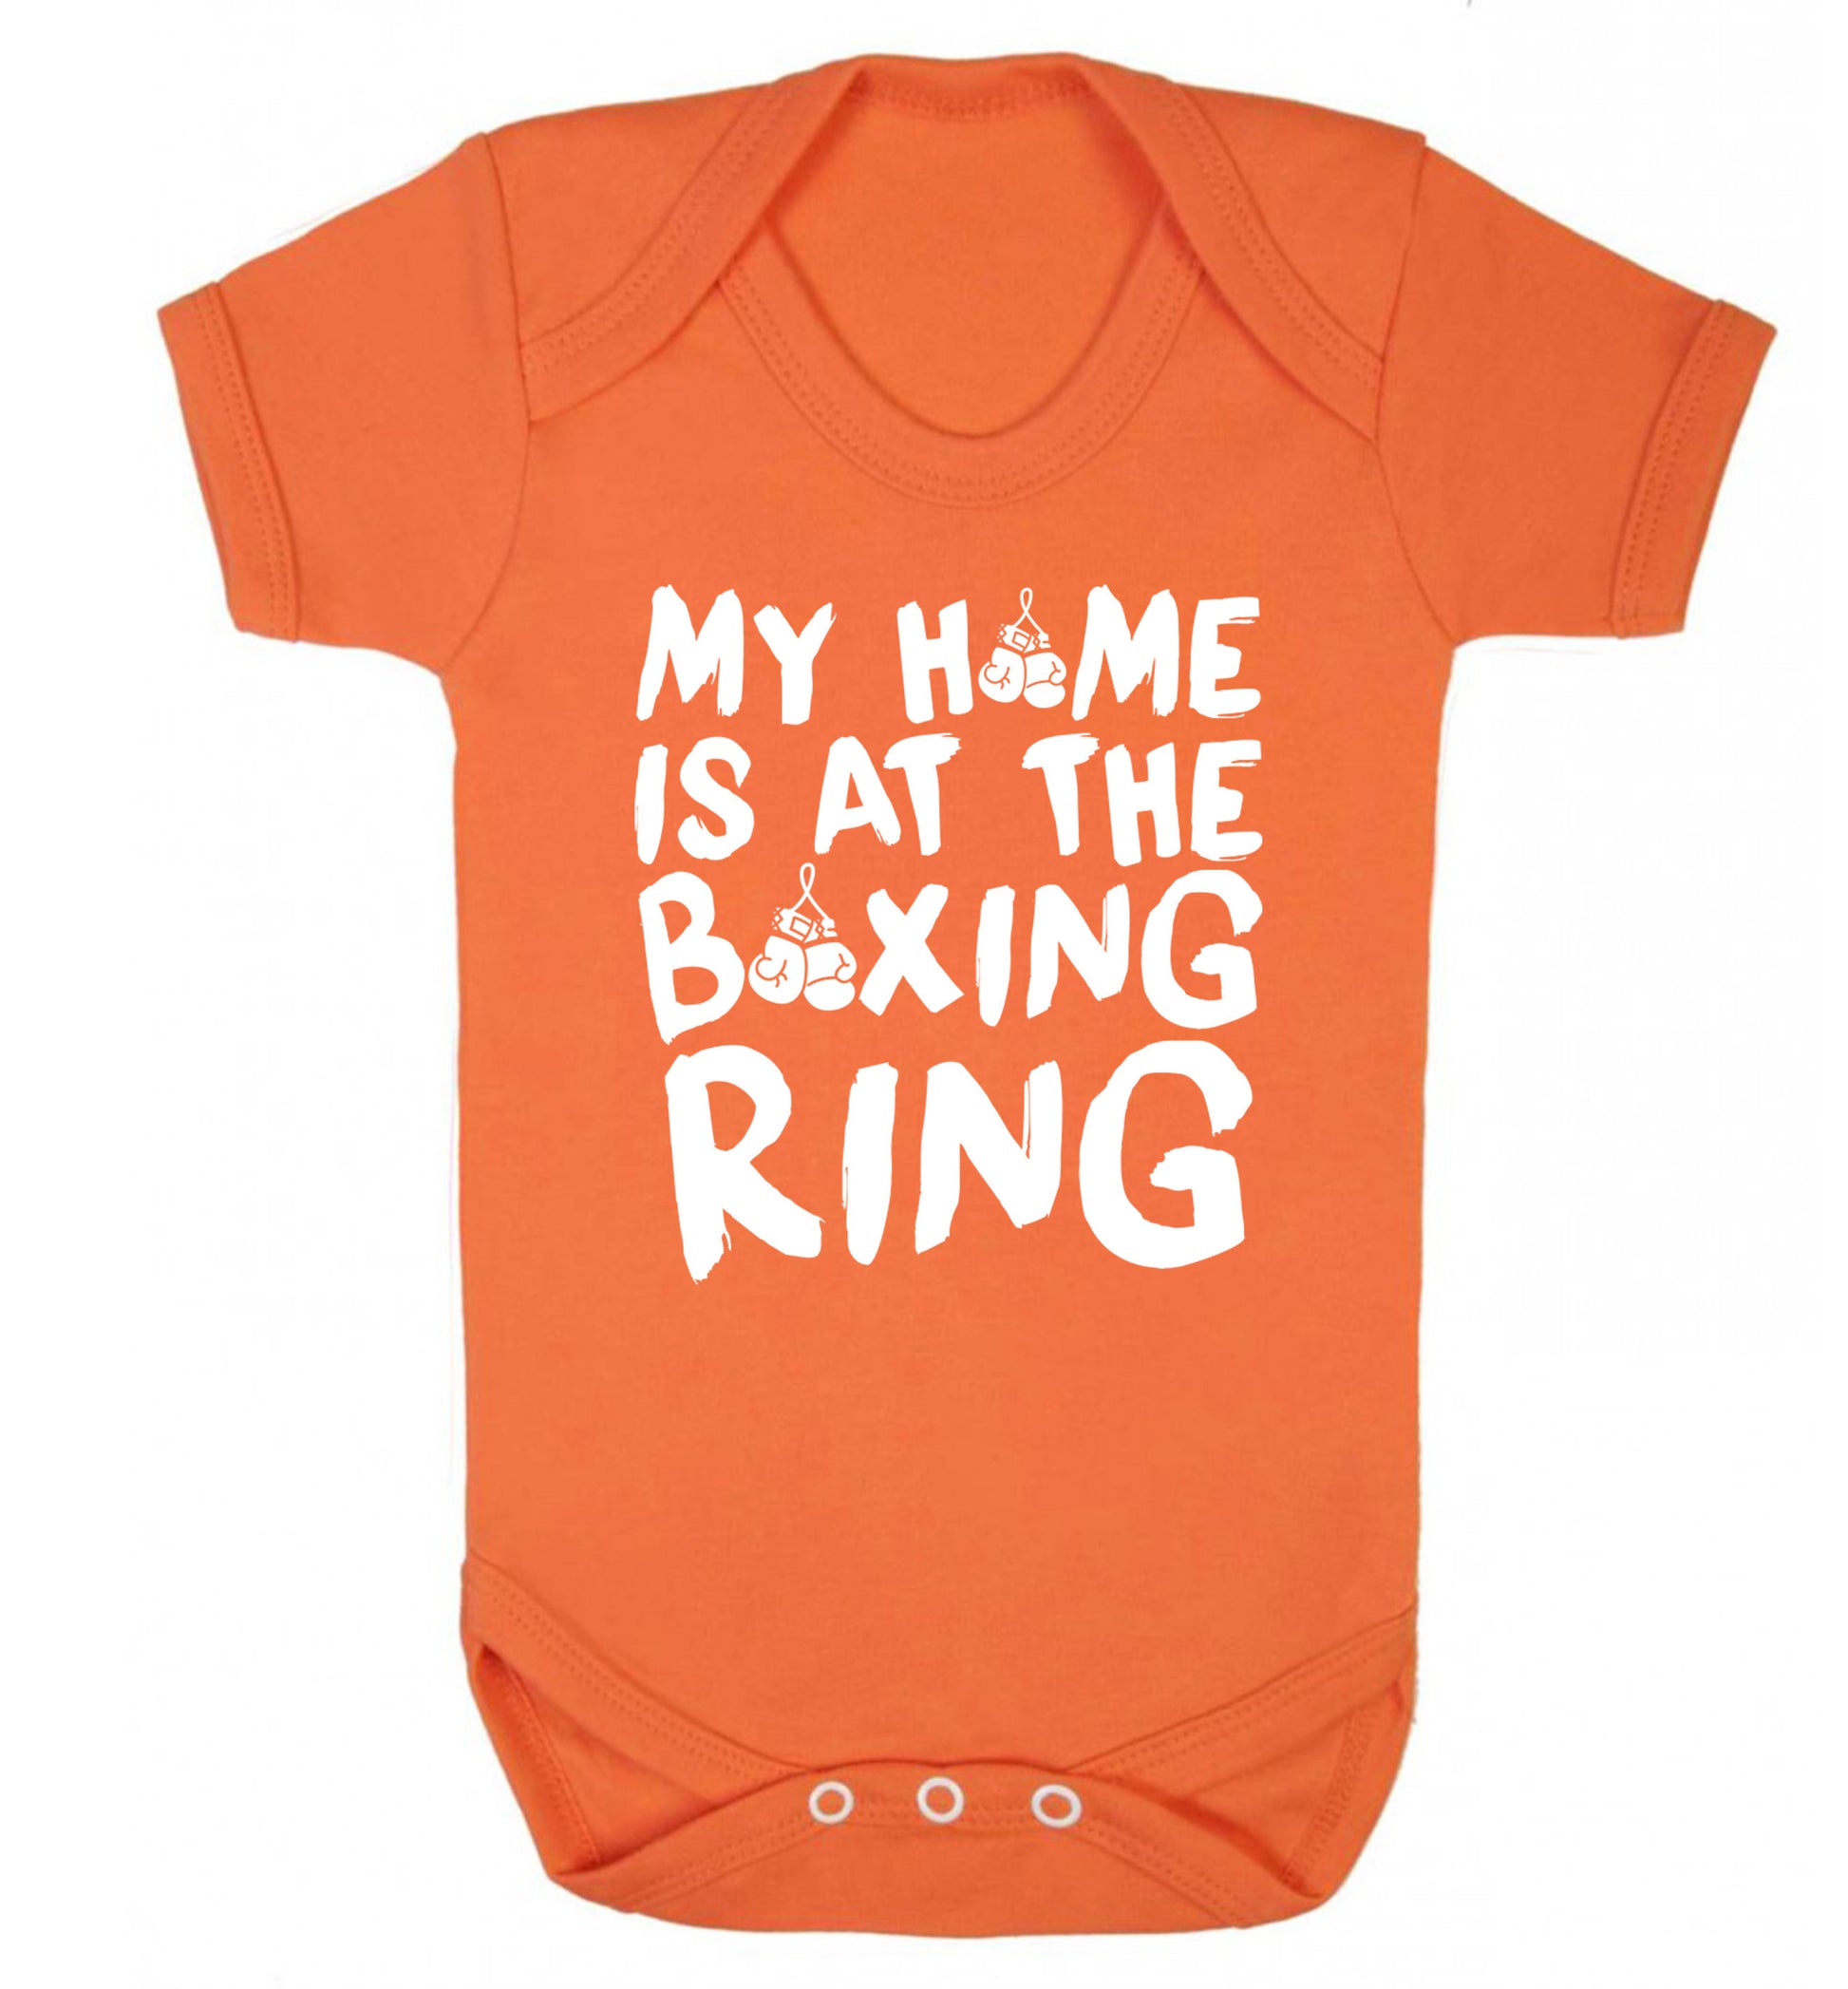 My home is at the boxing ring Baby Vest orange 18-24 months